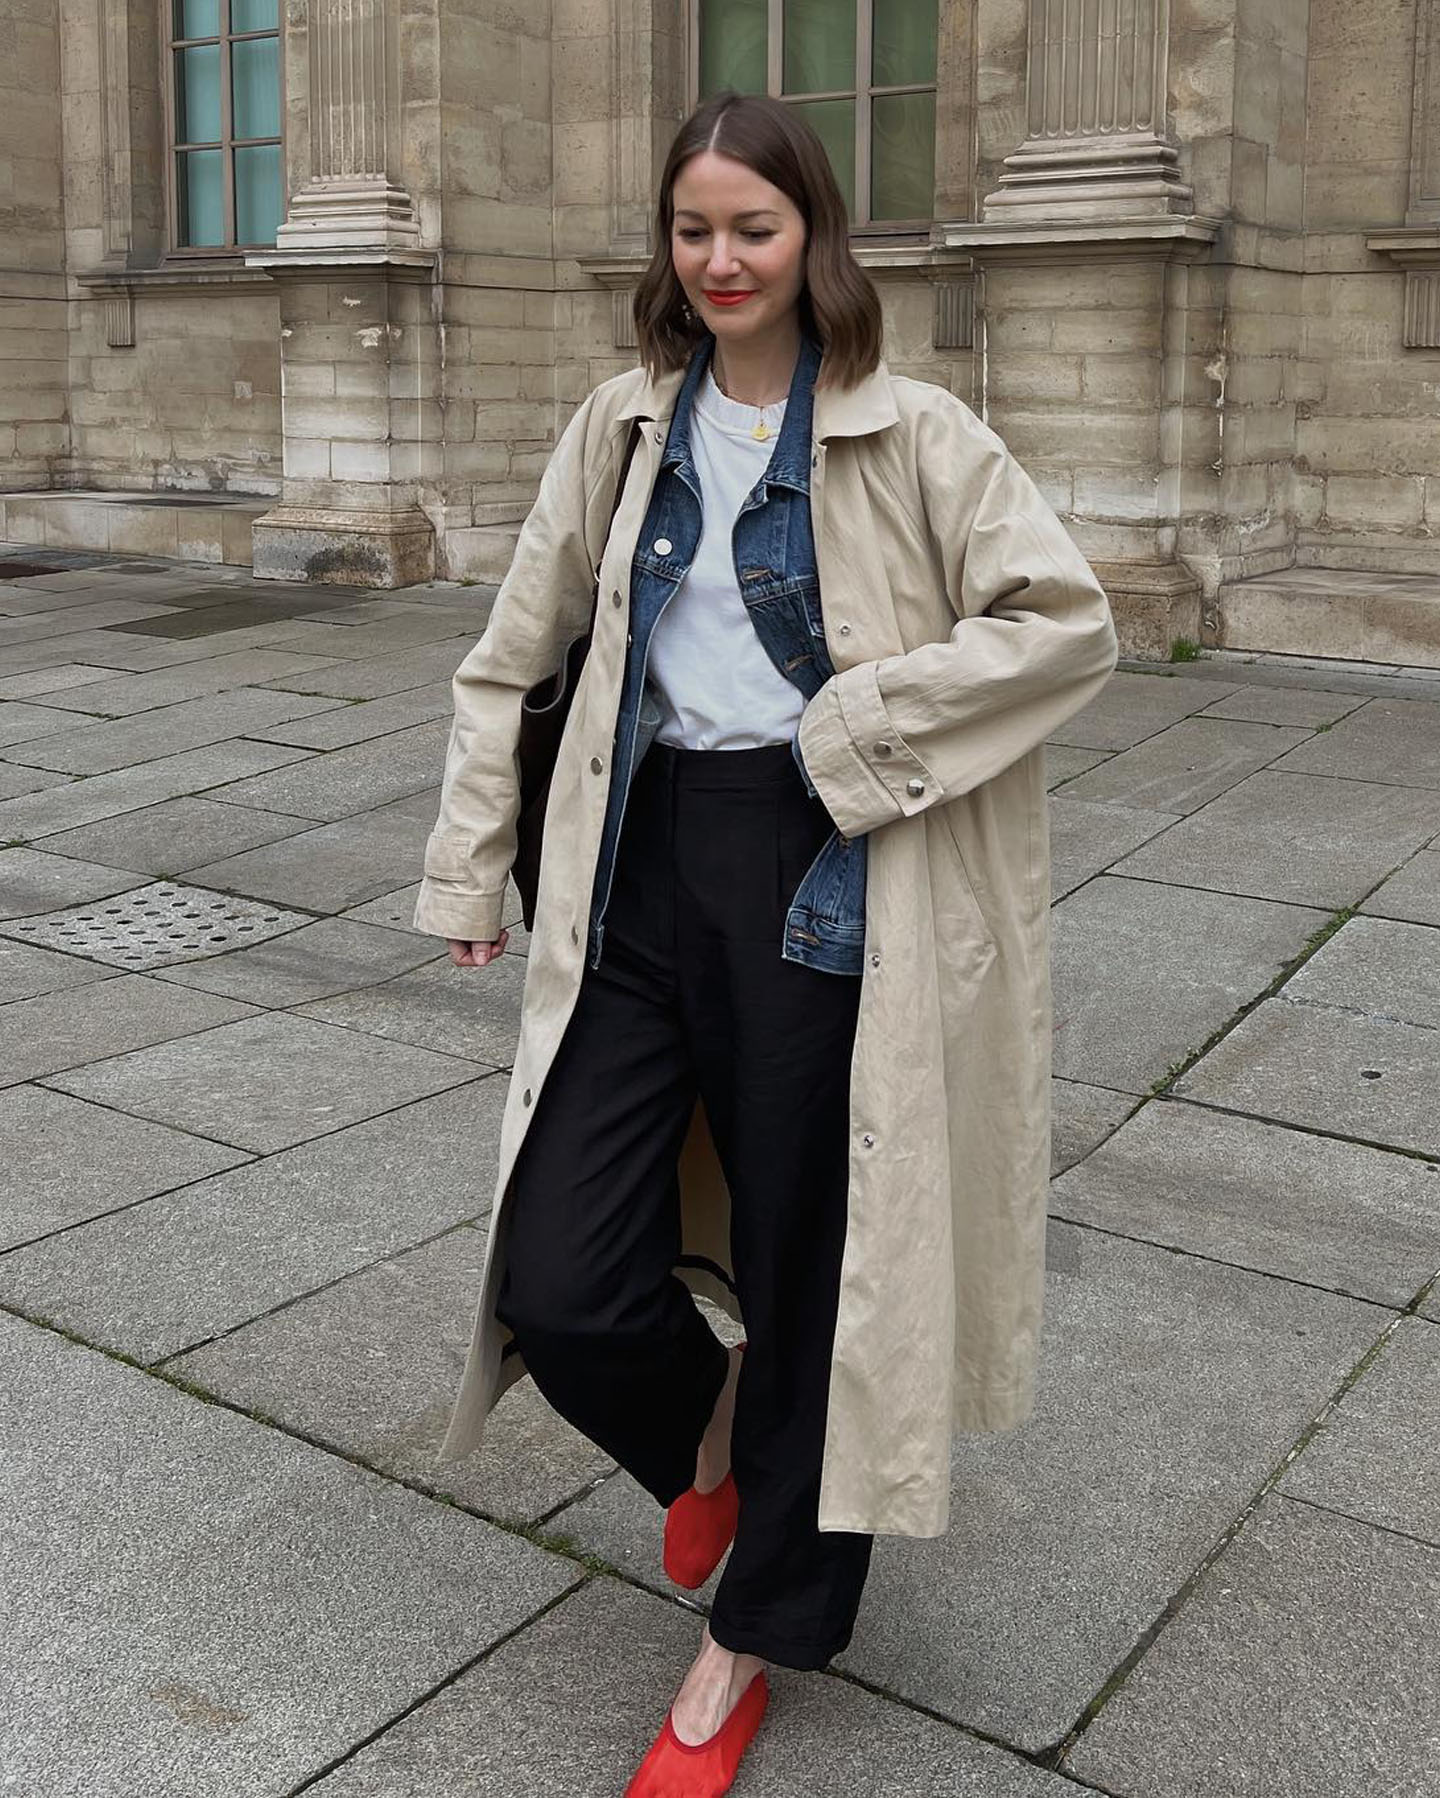 fashion influencer Marissa Cox poses on the sidewalk in Paris wearing a trench coat, denim jacket, white tee, black pants, and sheer red mesh flats